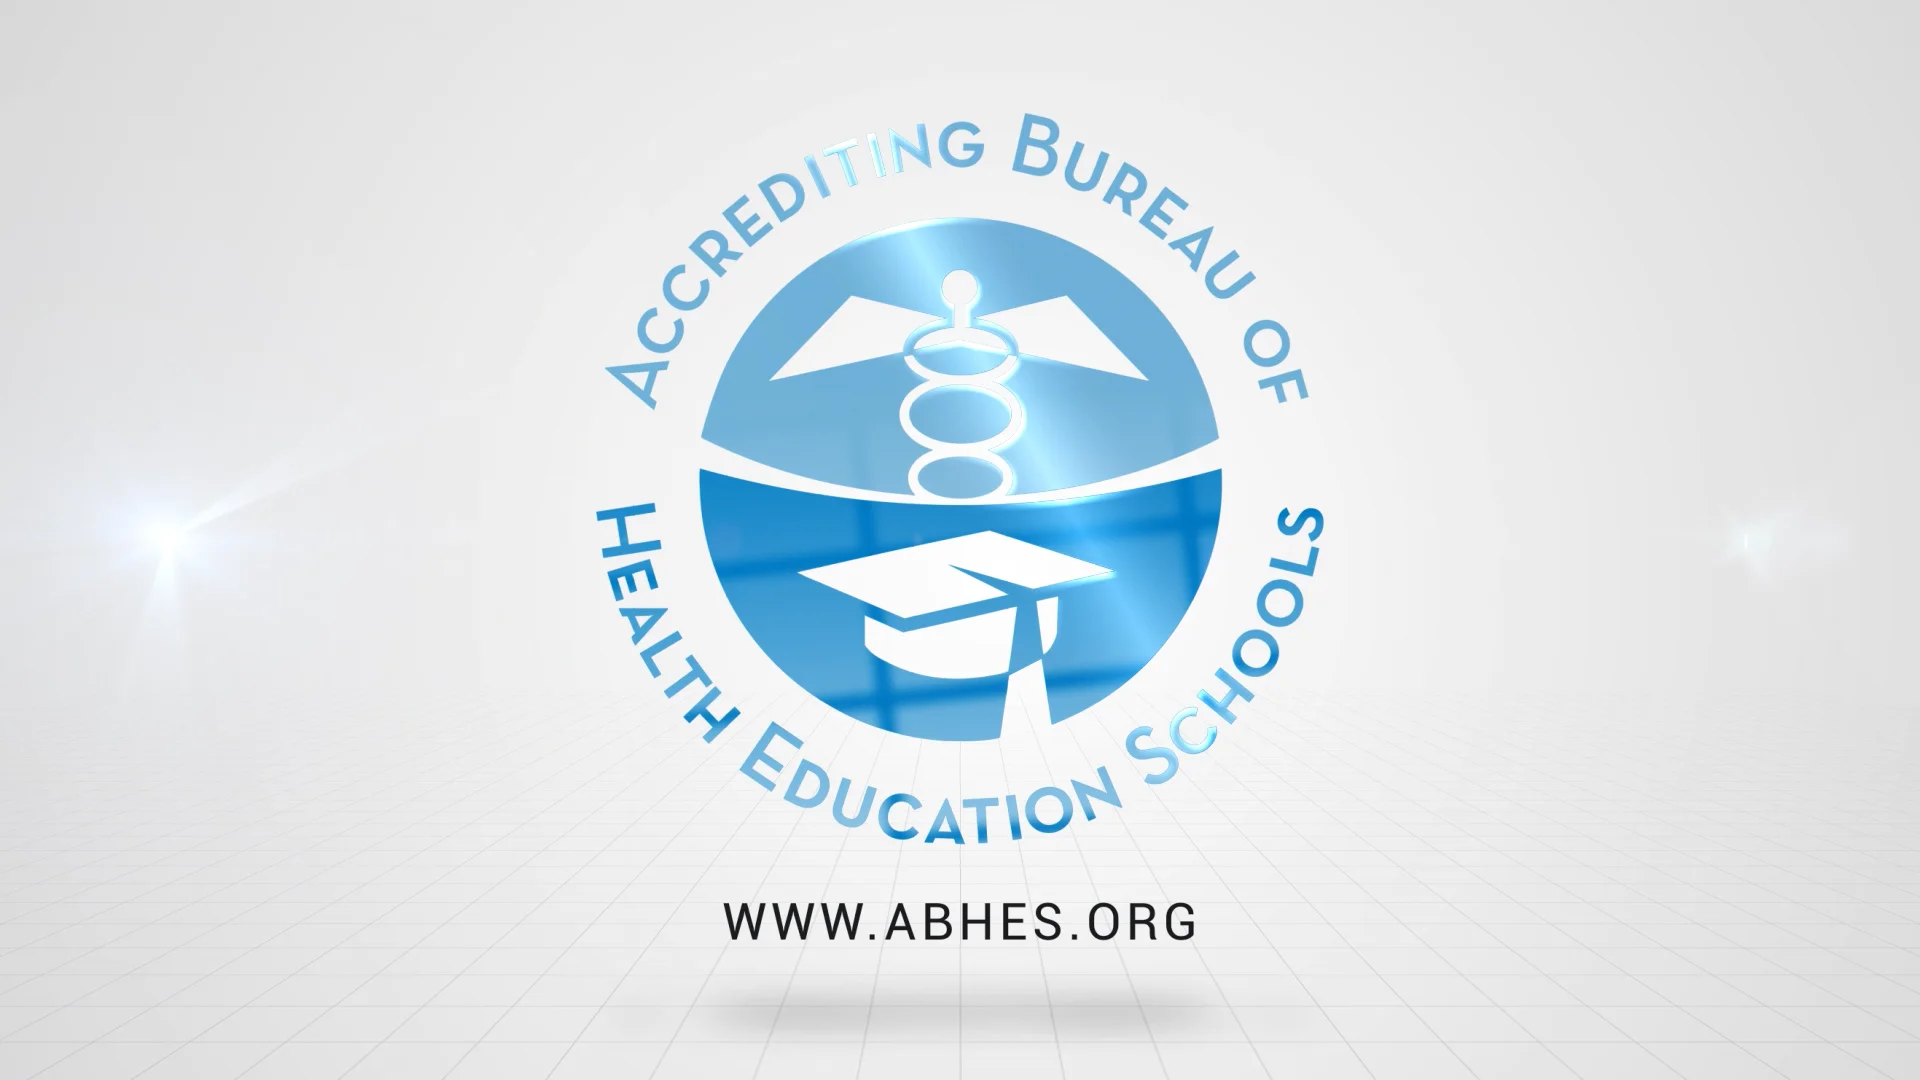 ABHES Conference Attendee Highlights on Vimeo